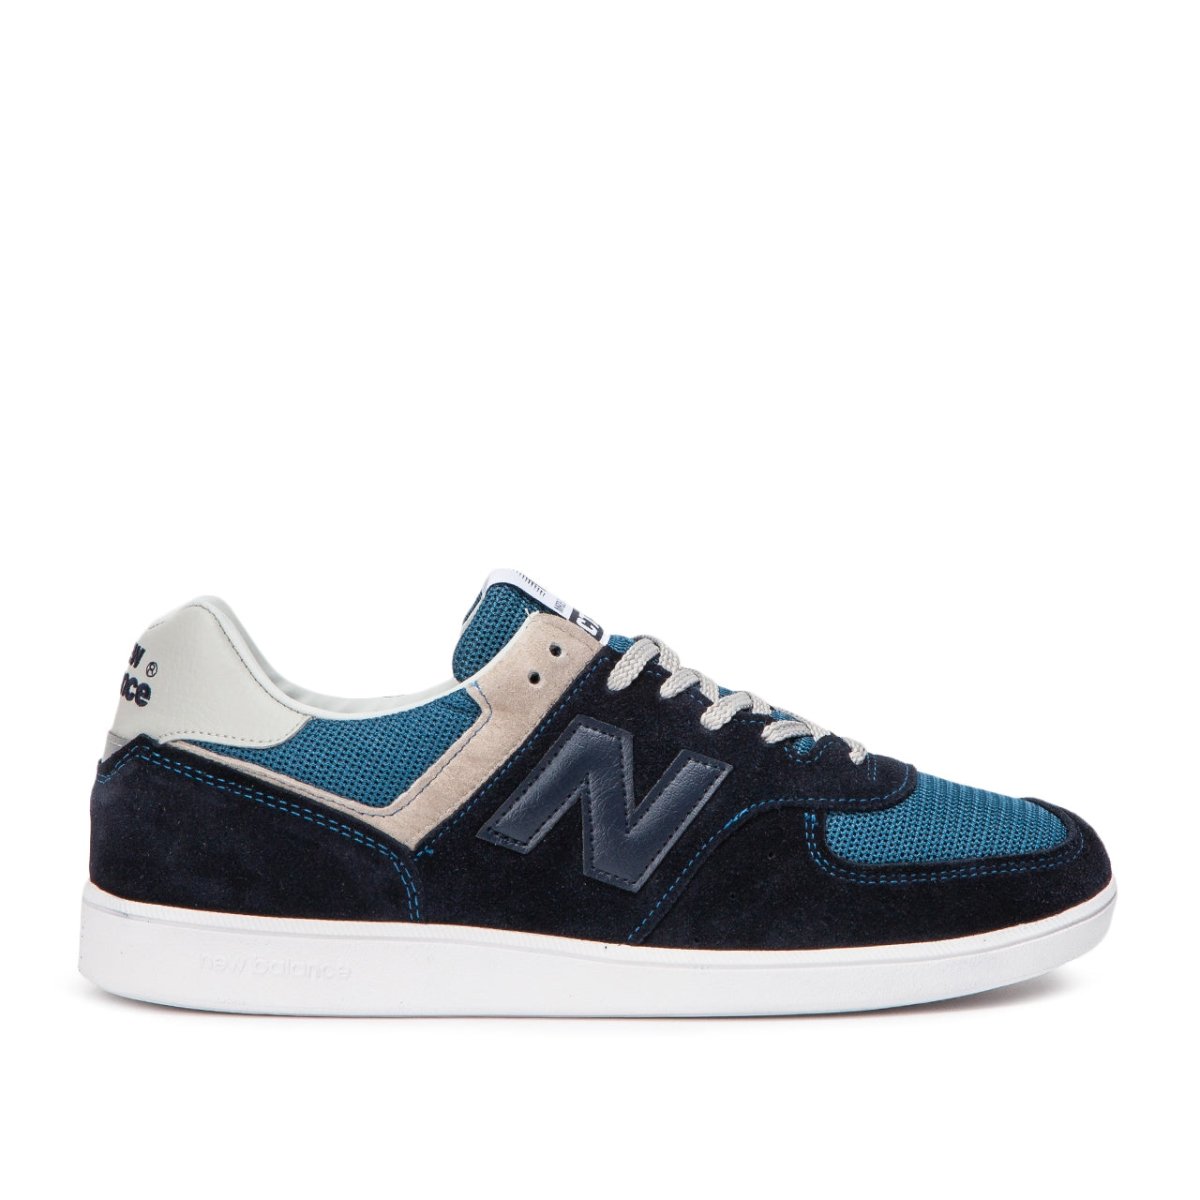 New Balance CT 576 OGN 'Made in England' (Navy / Grau)  - Allike Store